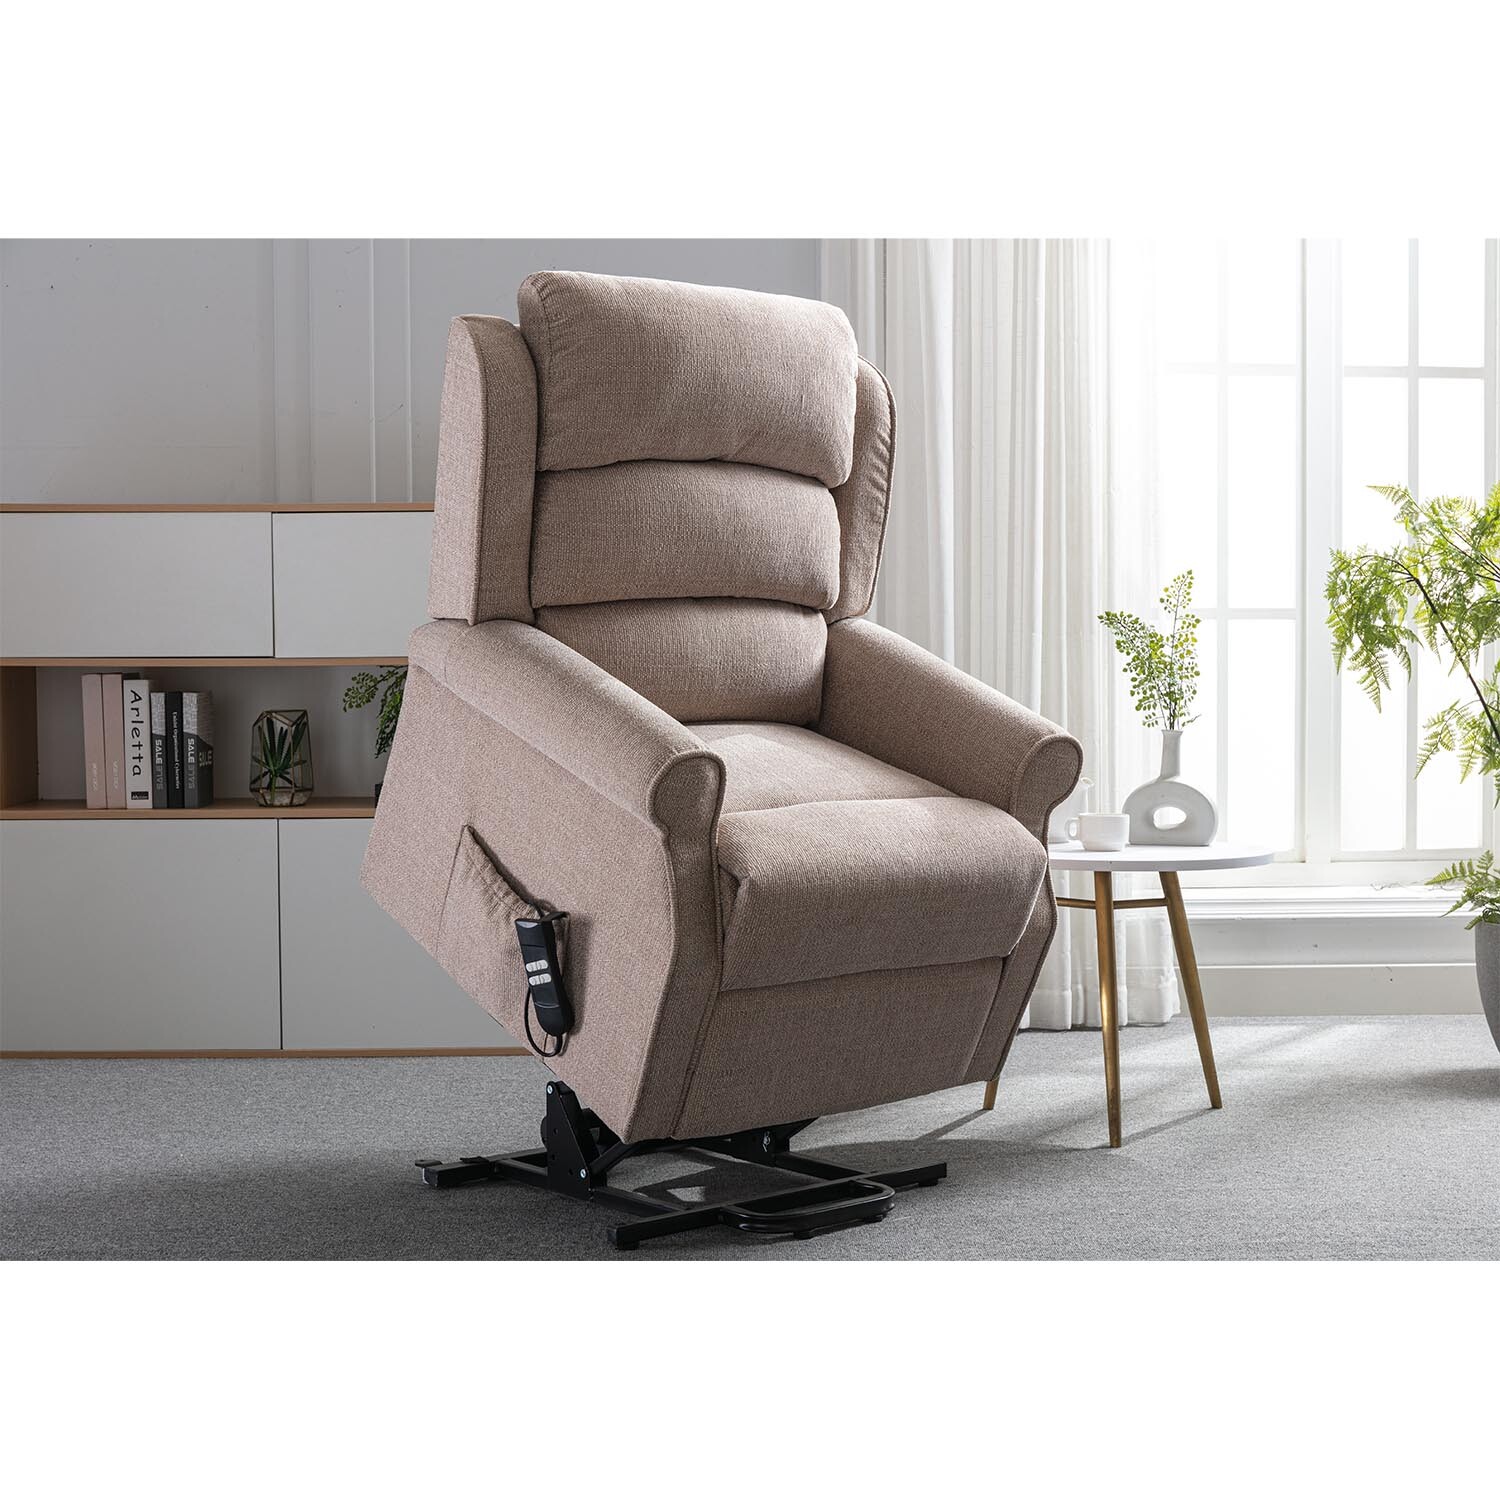 Winslow Neutral Wheat Fabric Rise Recliner Chair Image 4